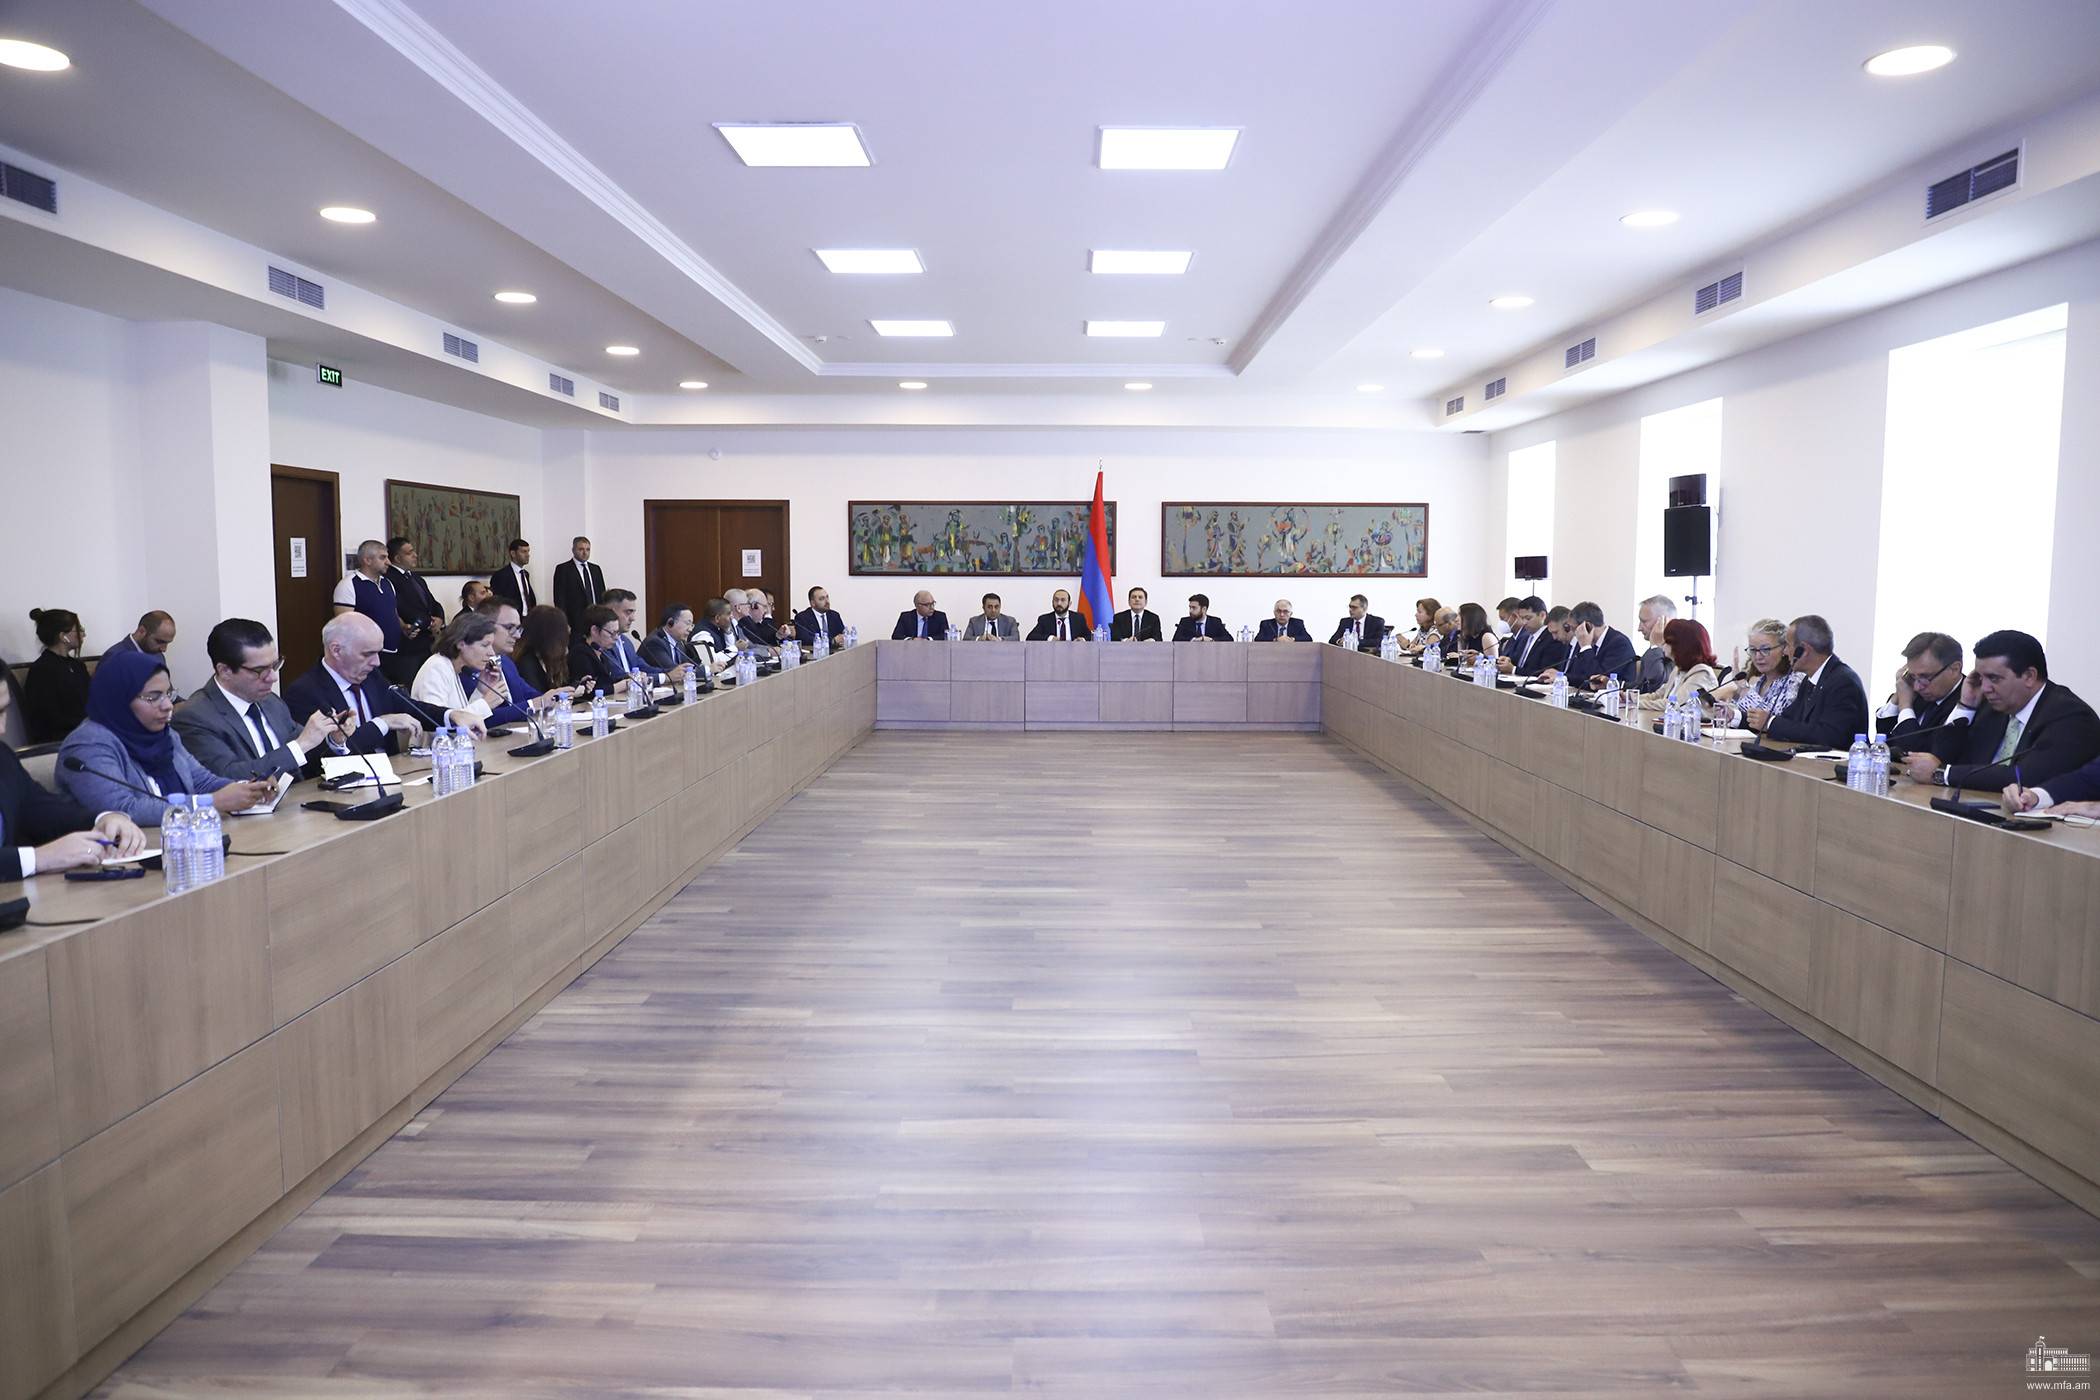 Meeting of Foreign Minister of Armenia Ararat Mirzoyan with the heads of diplomatic missions accredited in Armenia